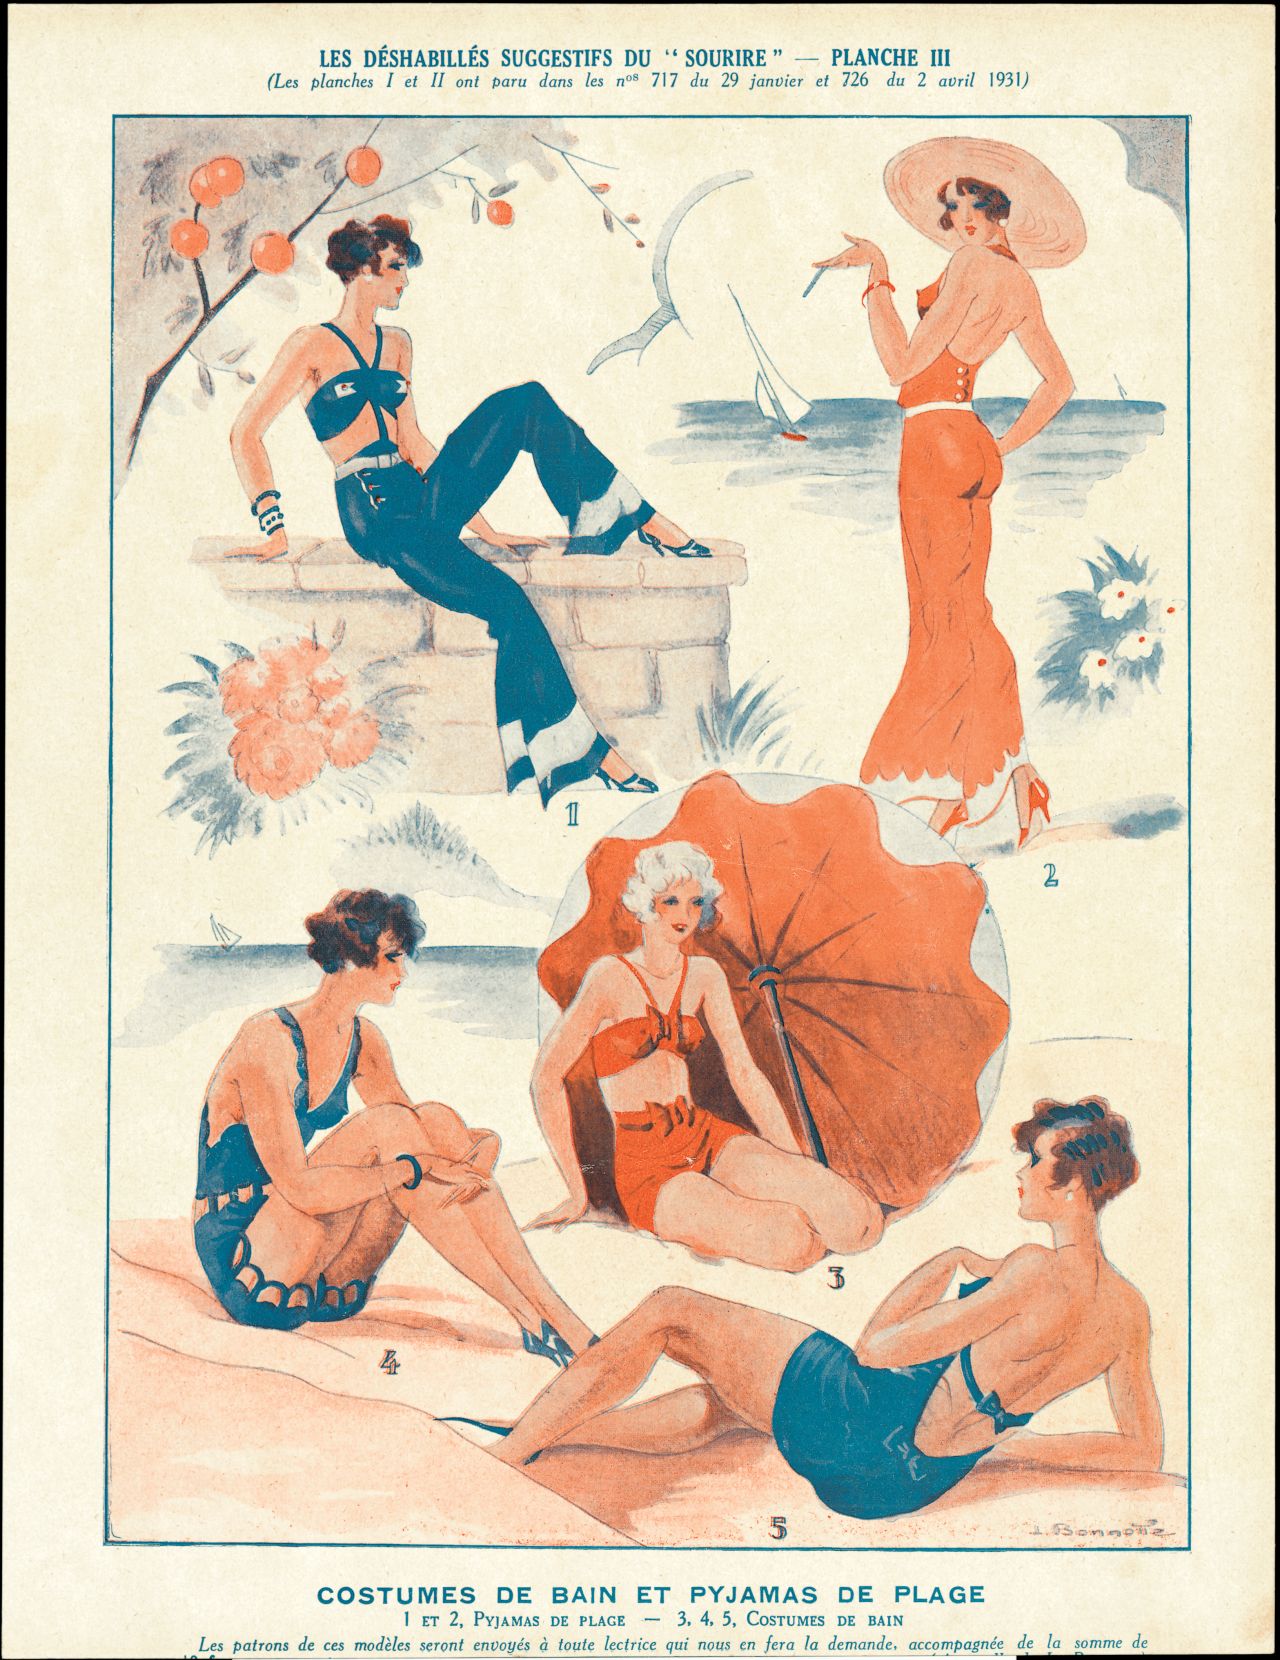 "Not just for children, the sailor suit crossed into women's wear, especially at the beach," said Butchart.<br />"So you've got this big association with seaside holidays, with leisure time, with being by the sea, with that sort of carefree attitude that goes with being on holiday."